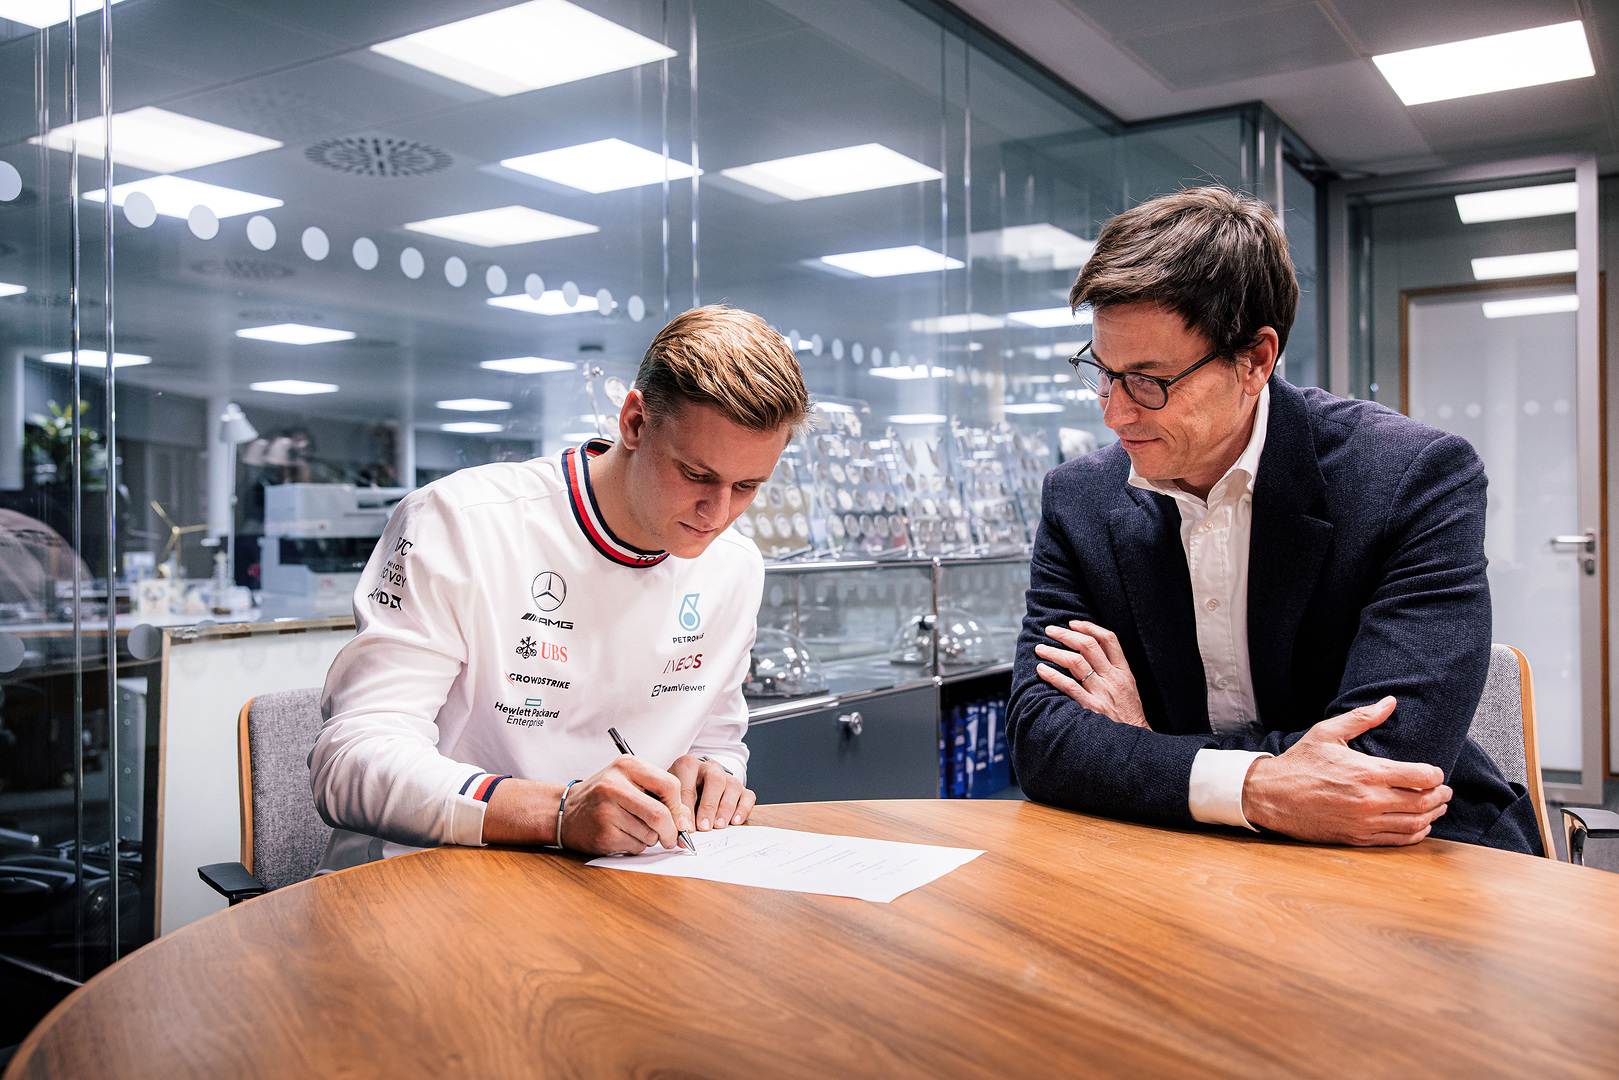 Pictured: Mick Schumacher (left) and Toto Wolff (right)